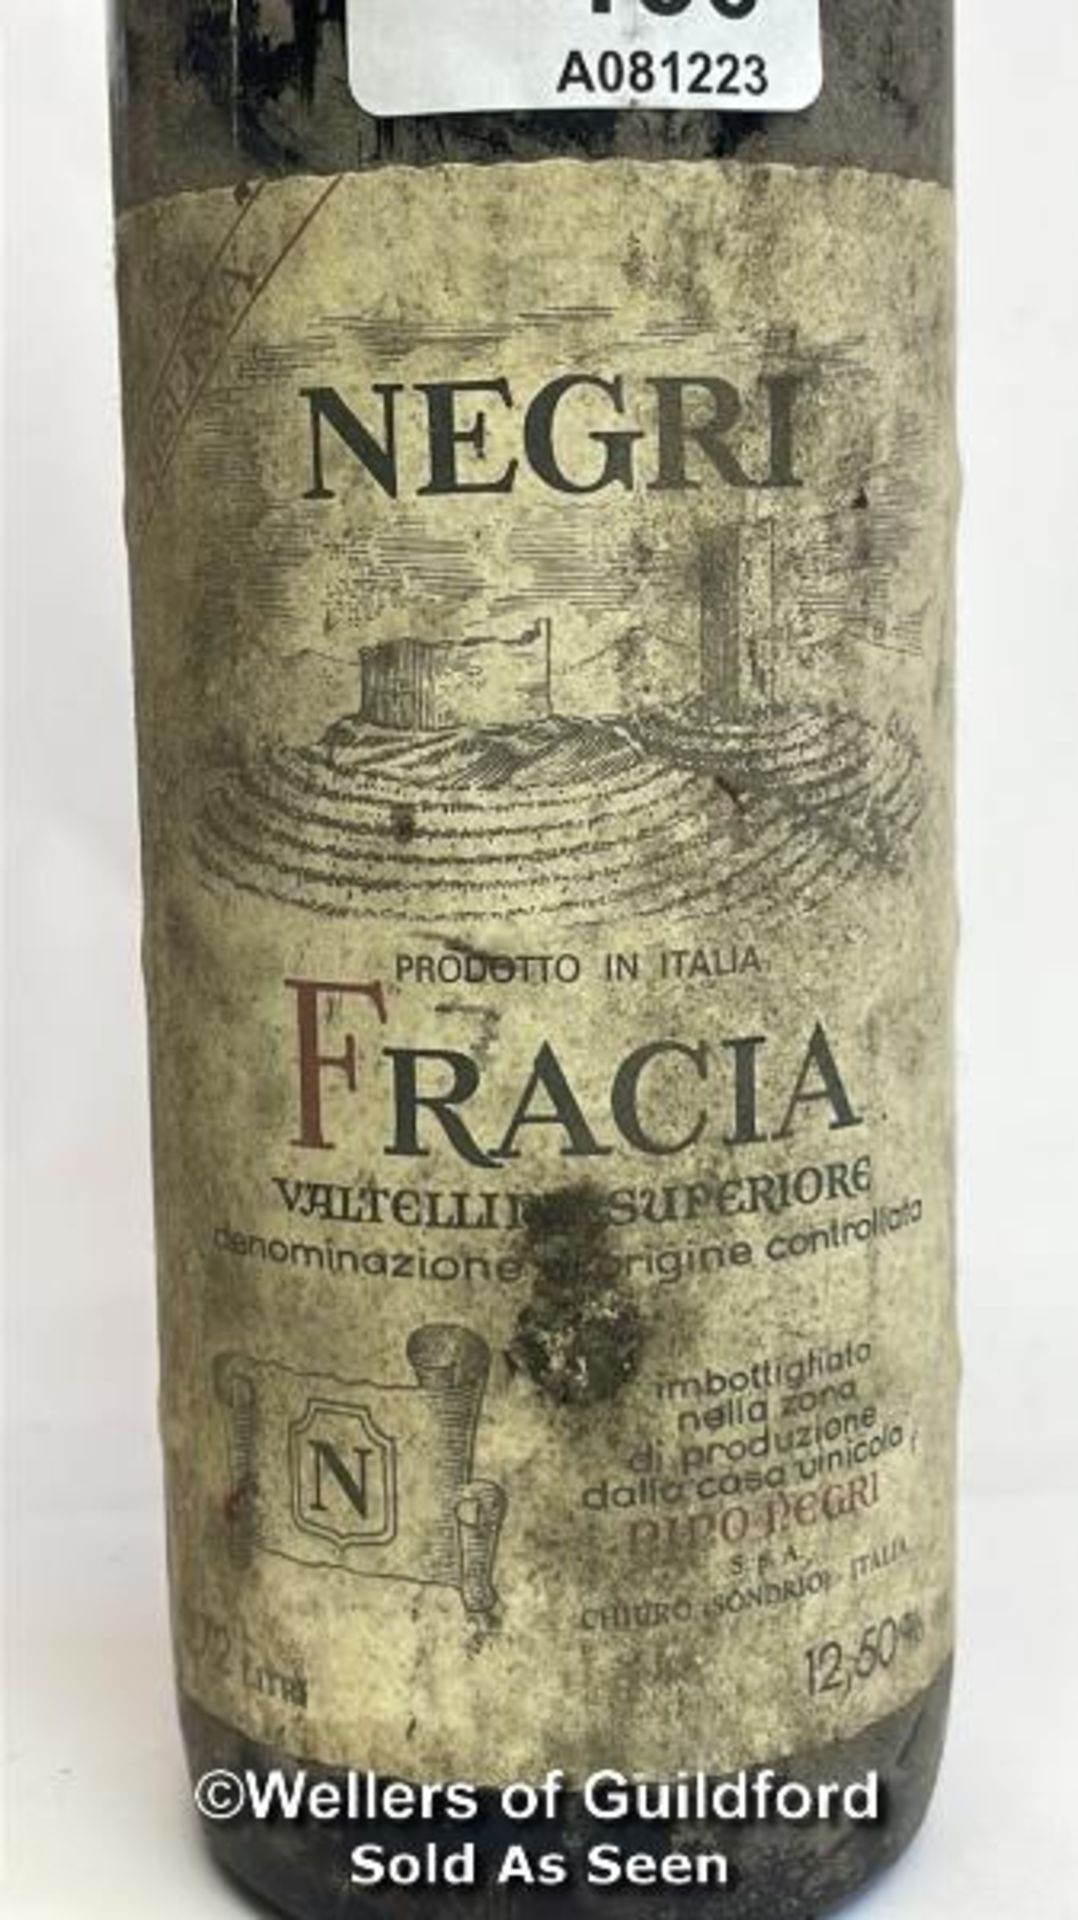 1971 Negri Fracia, 72cl, 12.5% vol / Please see images for fill level and general condition. - Bild 2 aus 7